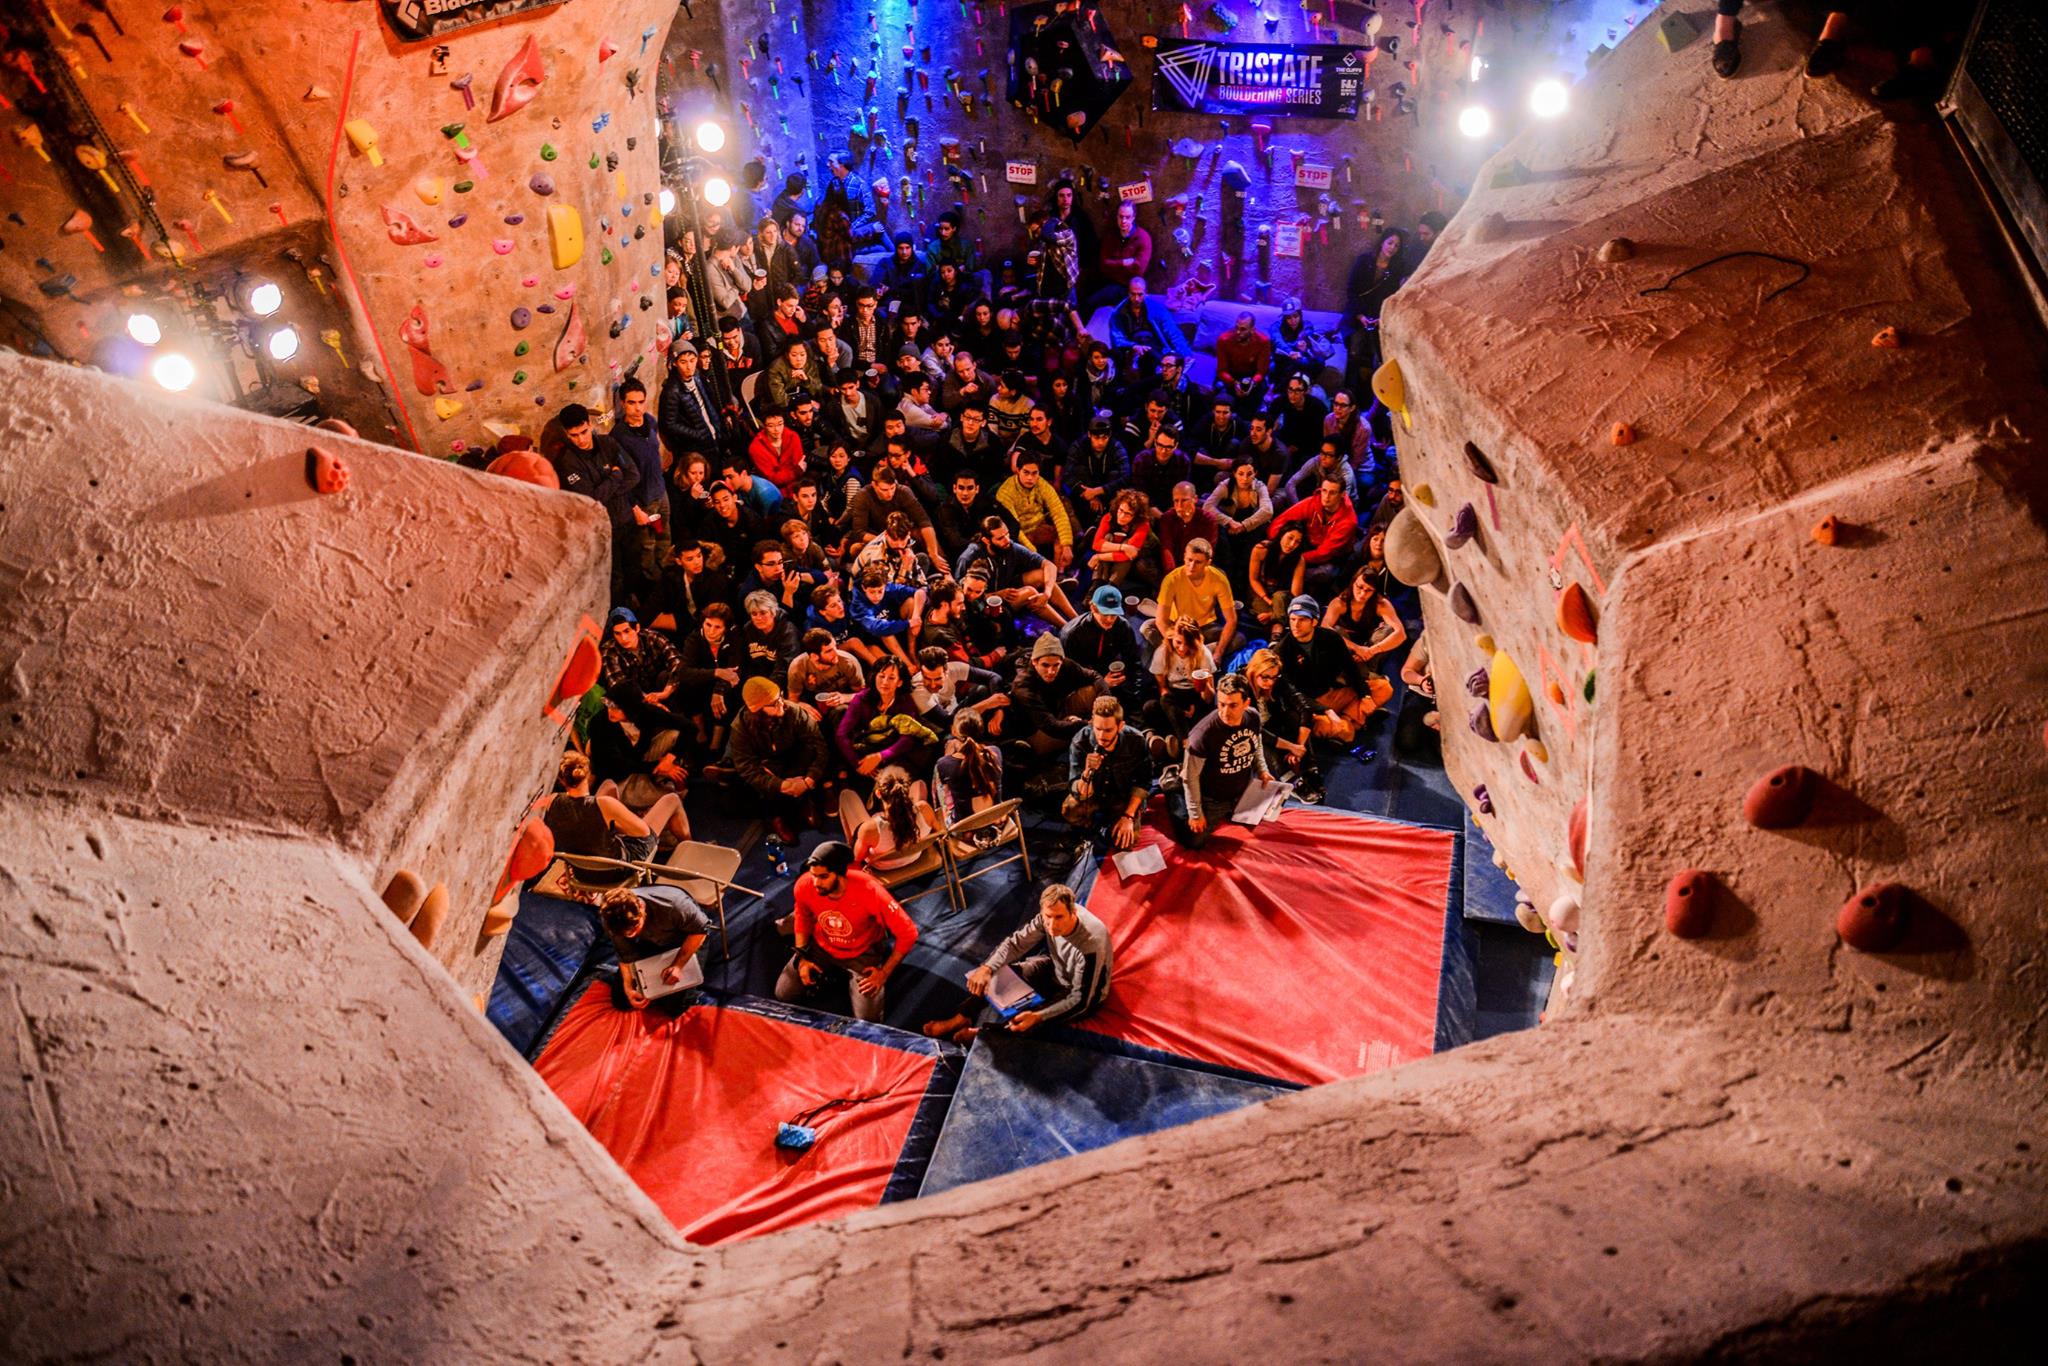  The Cliffs at Valhalla stuffed with people for Feats of Strength XI finals!&nbsp; 